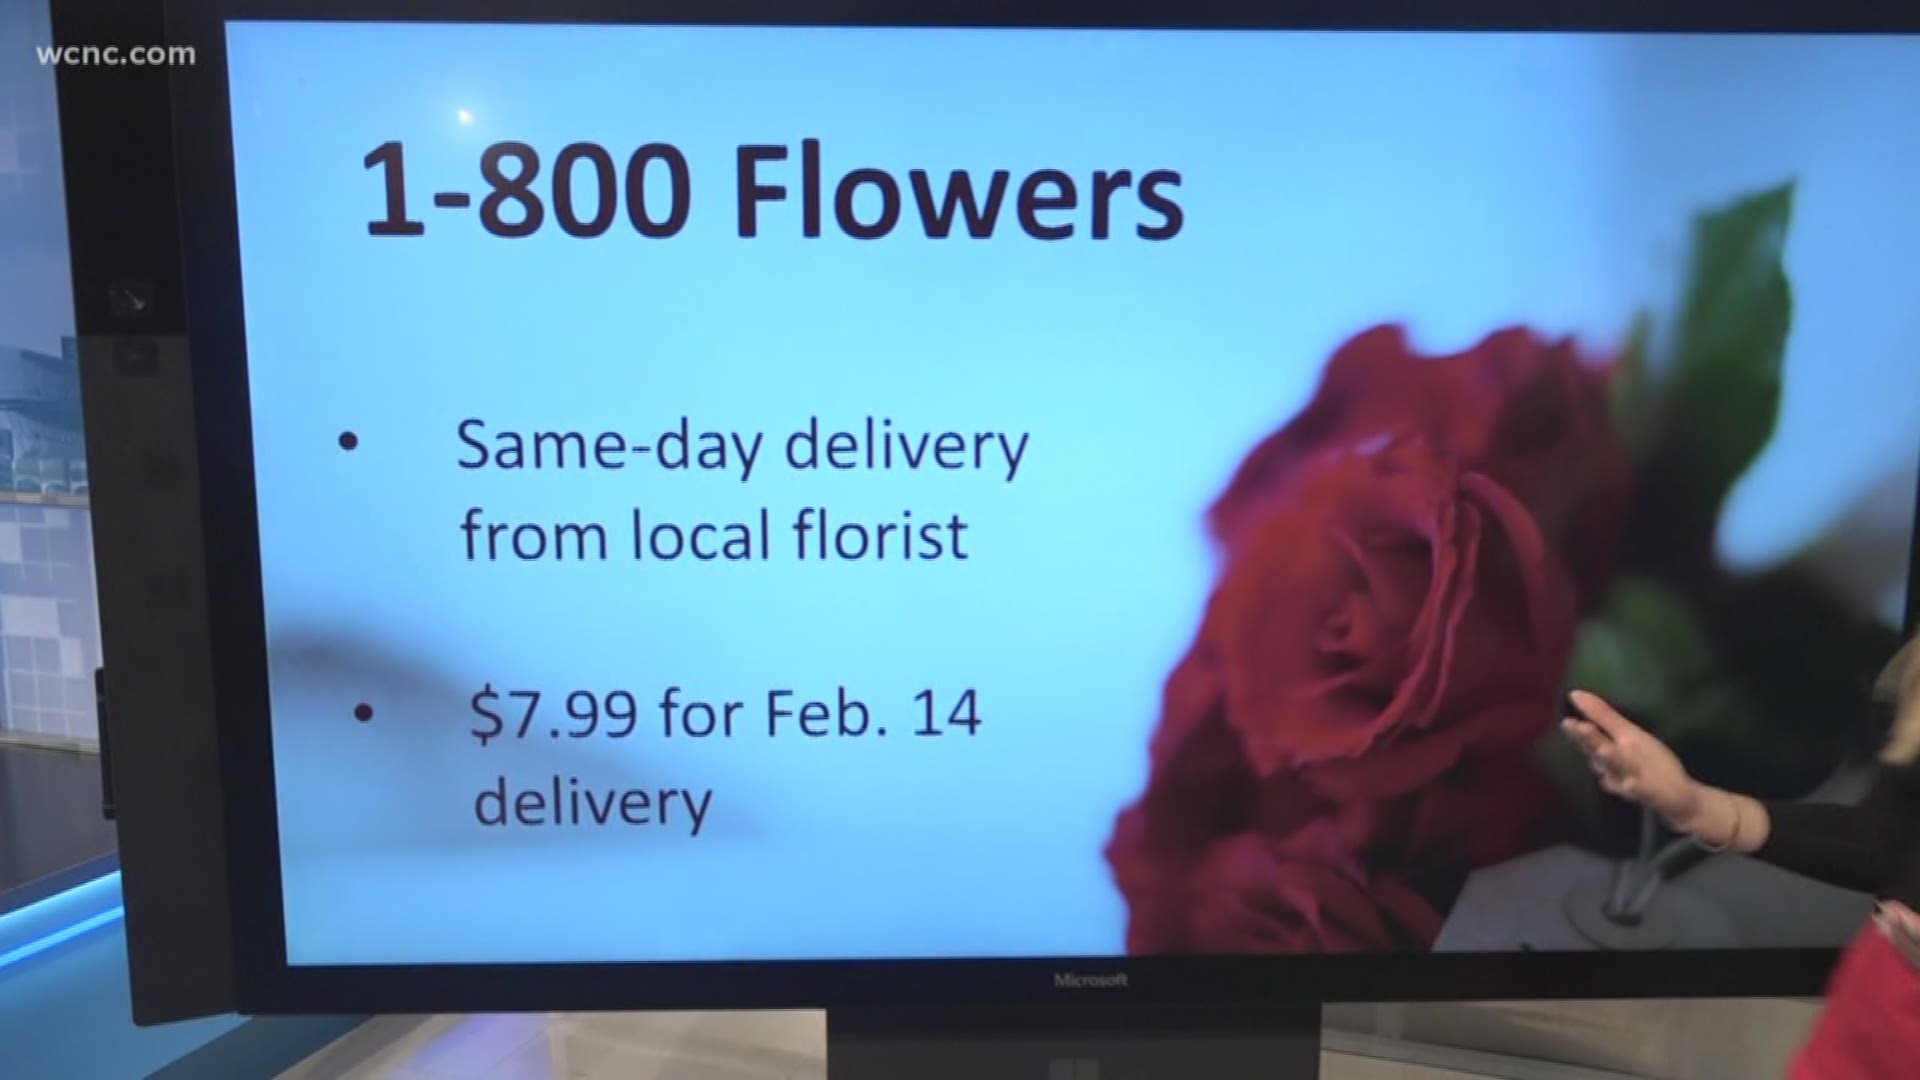 Thursday is Valentine's Day. And if you still haven't gotten something special for your loved one, these flower shops can help you with last-minute orders.